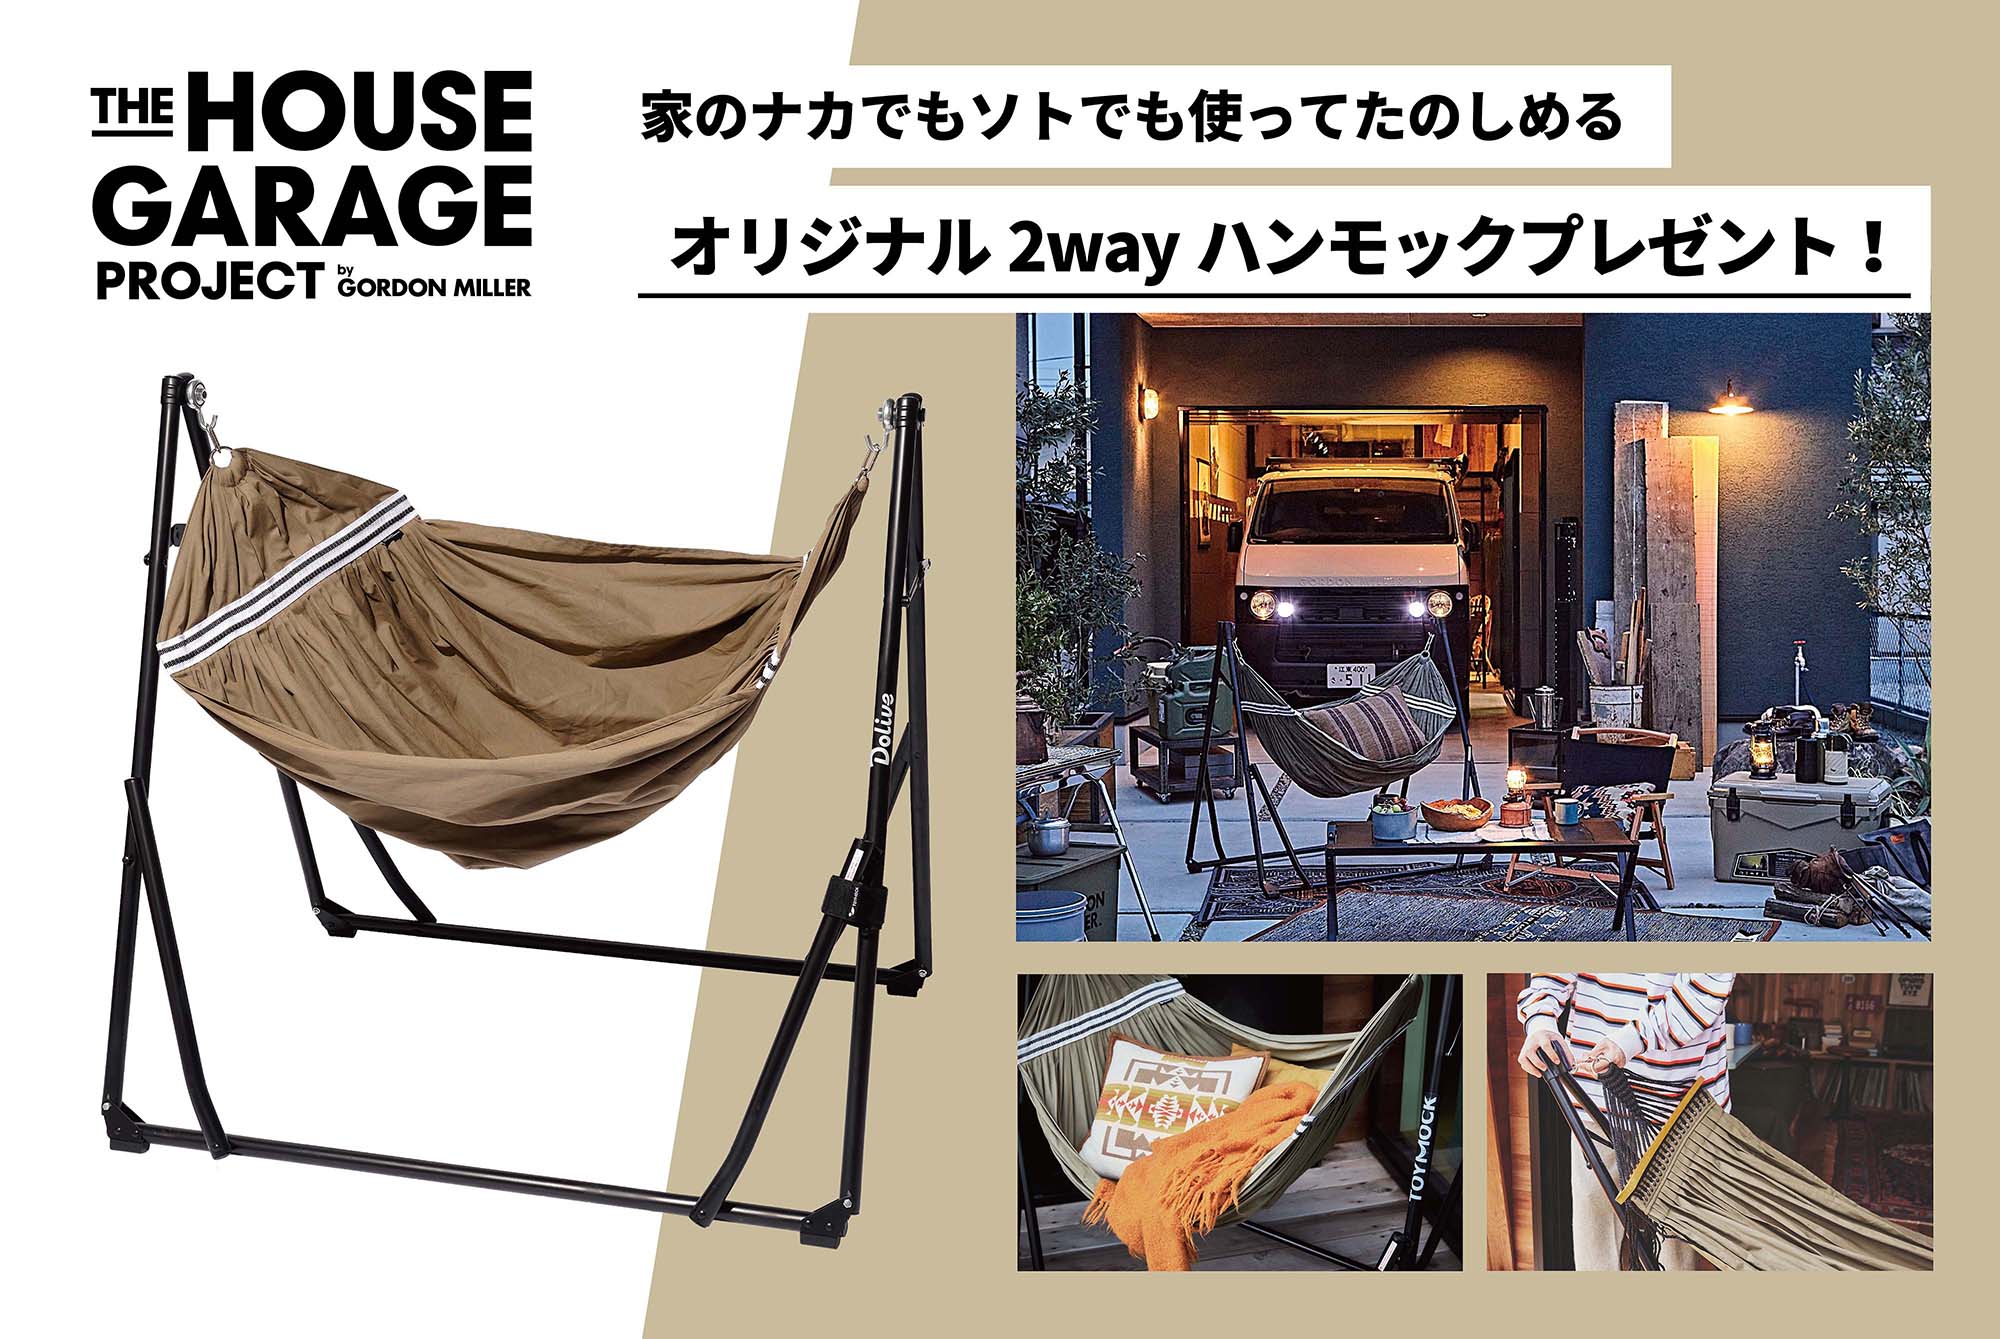 THE HOUSE GARAGE PROJECT,ハンモック